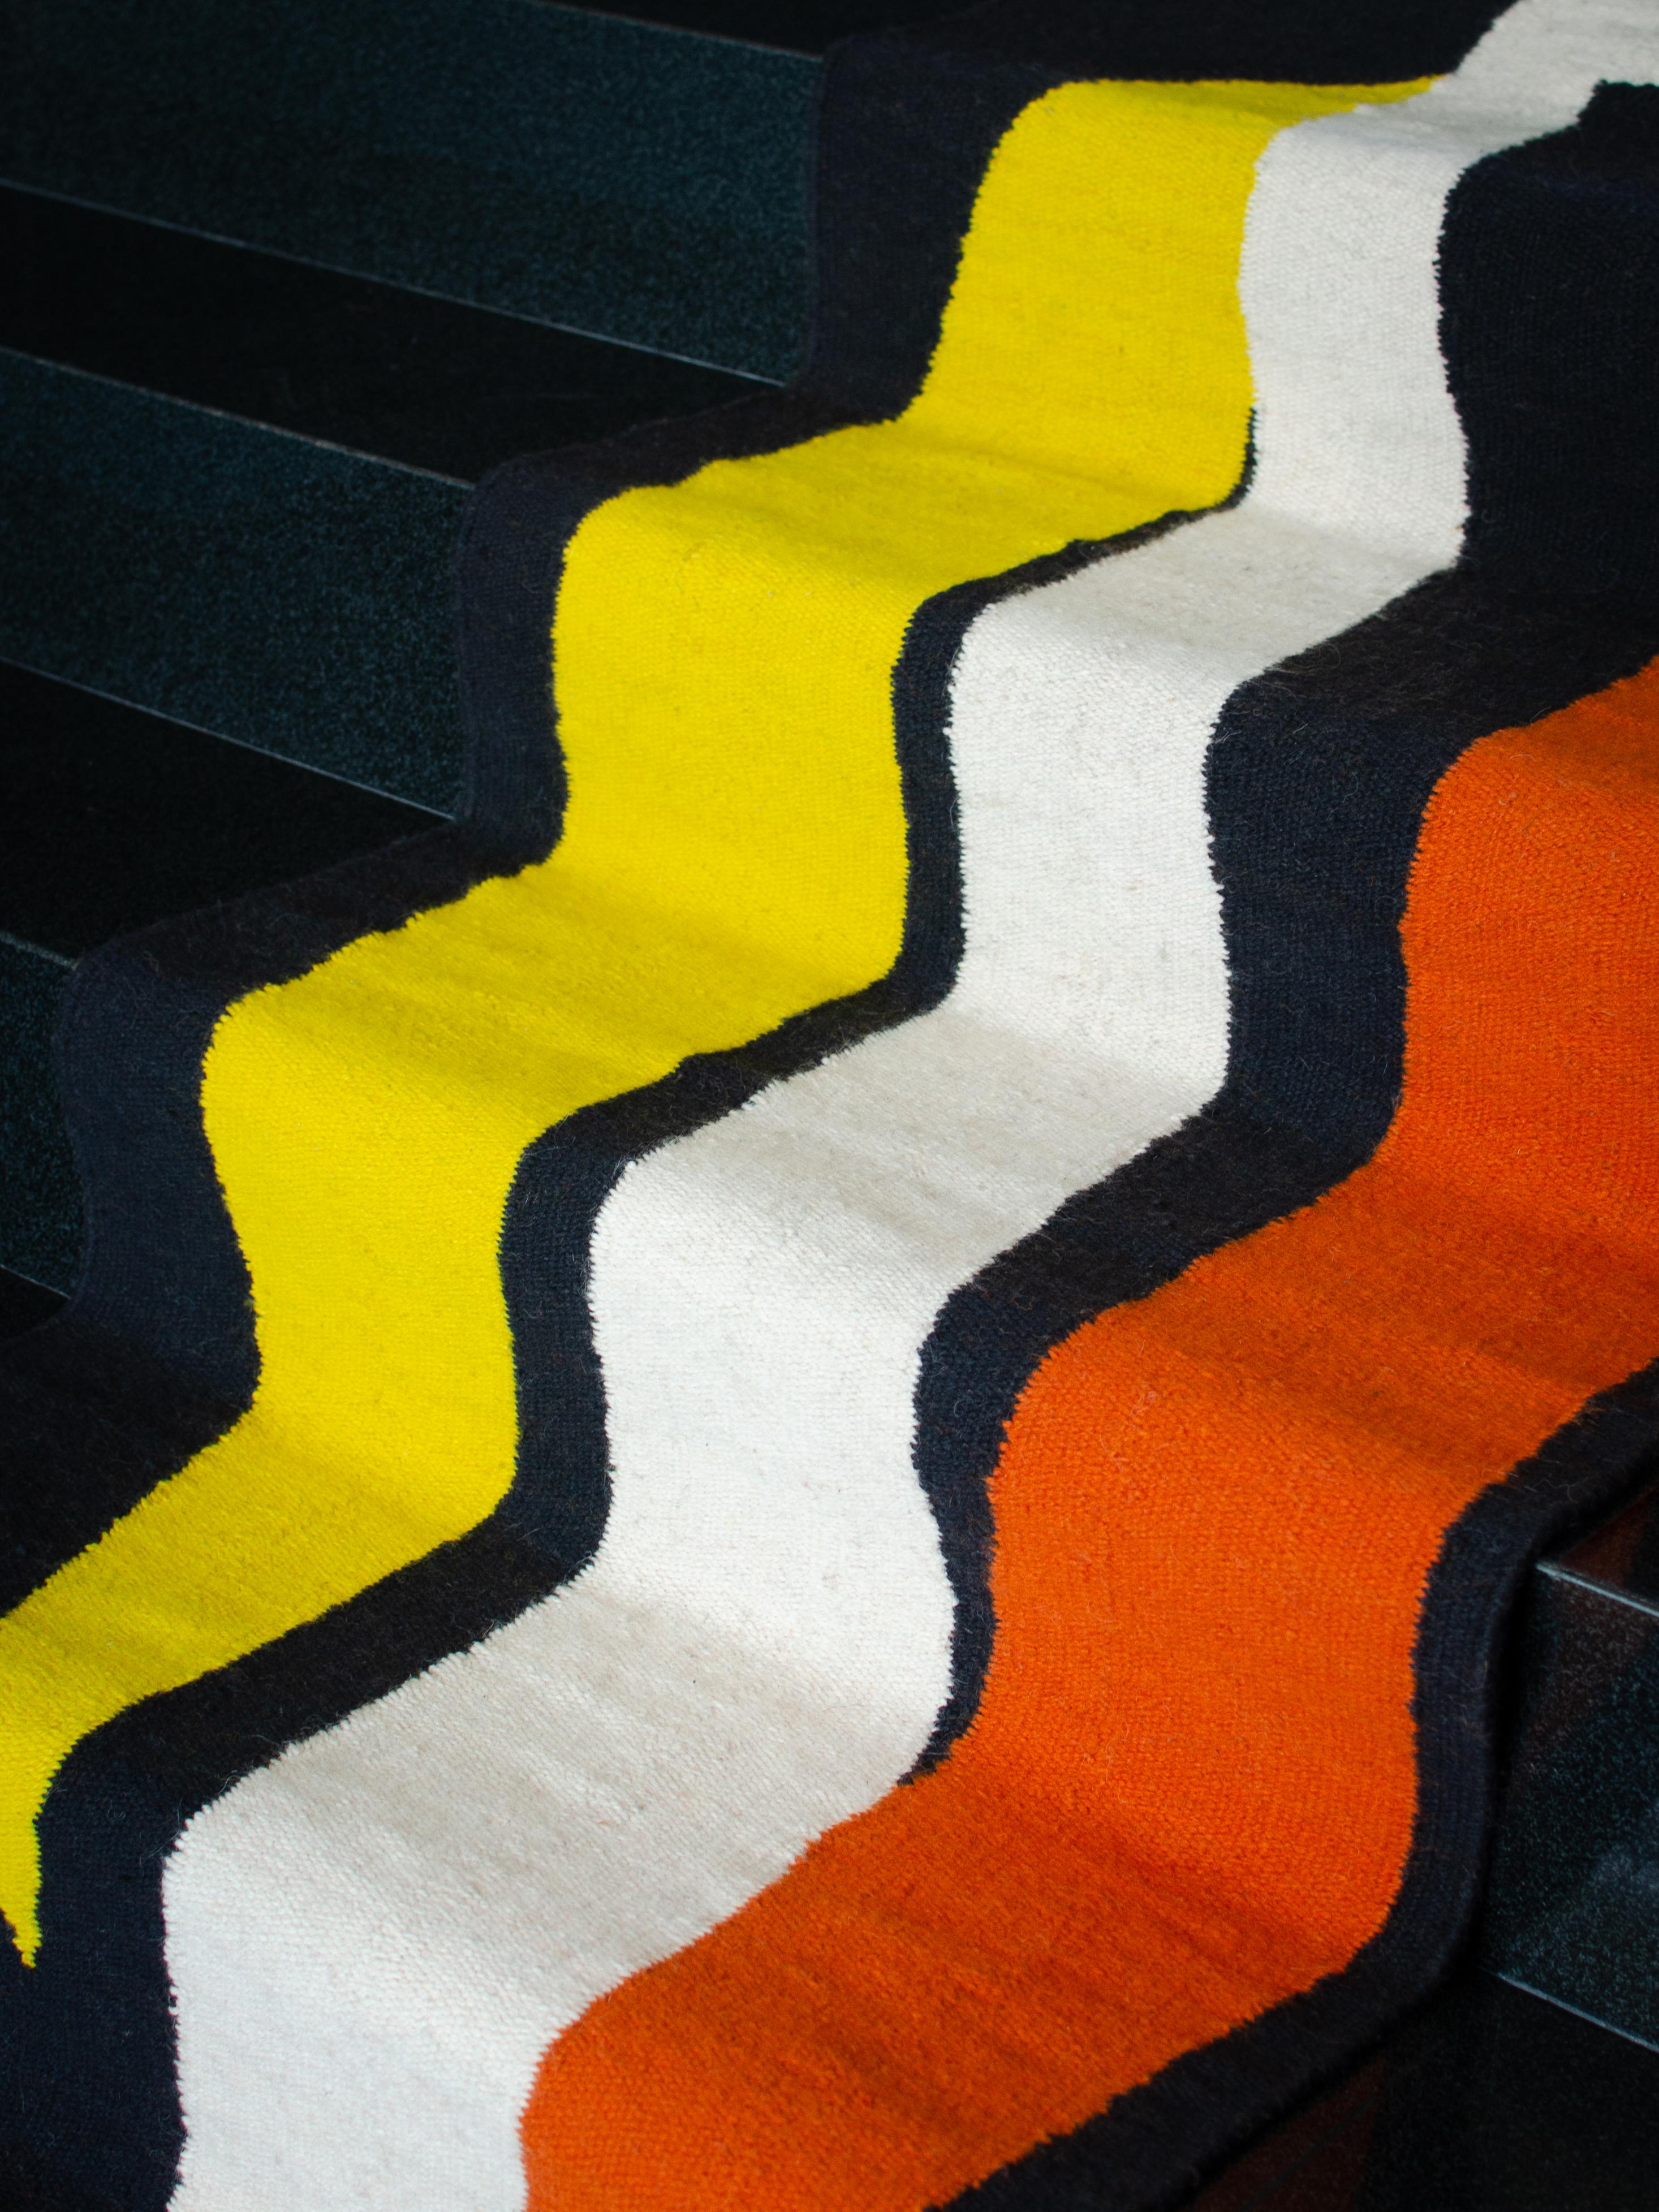 Adapted from the original artwork by Ary Brizzi, Untitled, 1956.

Limited edition of 15 handmade and unique rugs.

LALANA RUGS is an applied arts initiative born from the desire to combine proposals by contemporary artists with traditional local